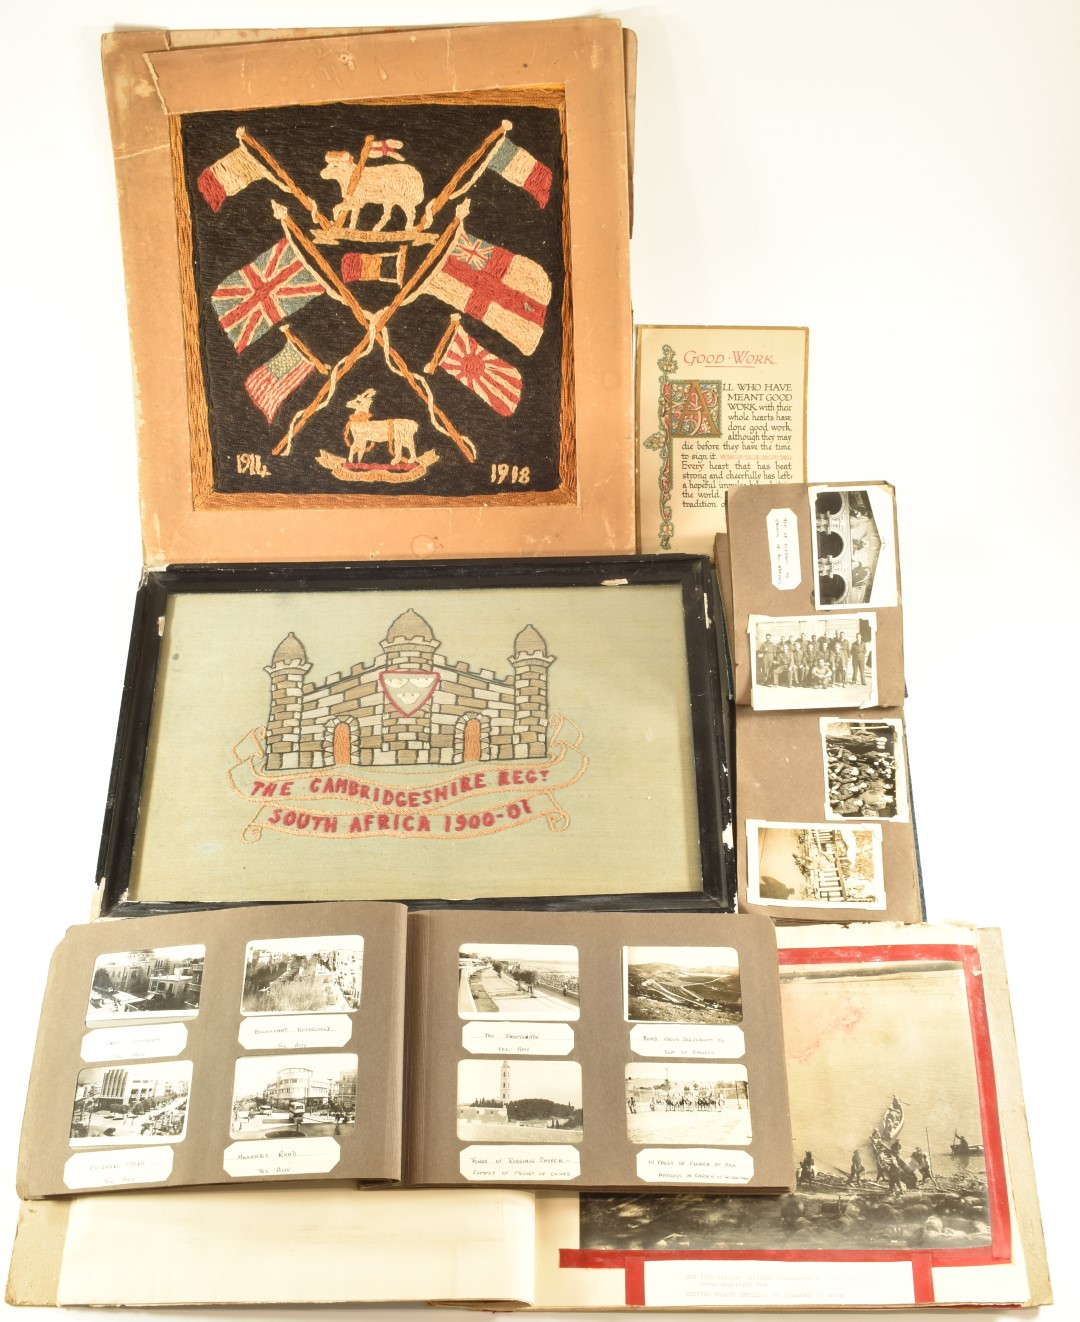 Two British Army WW2 tourist photo albums of Cairo and North Africa including Opera Square, the